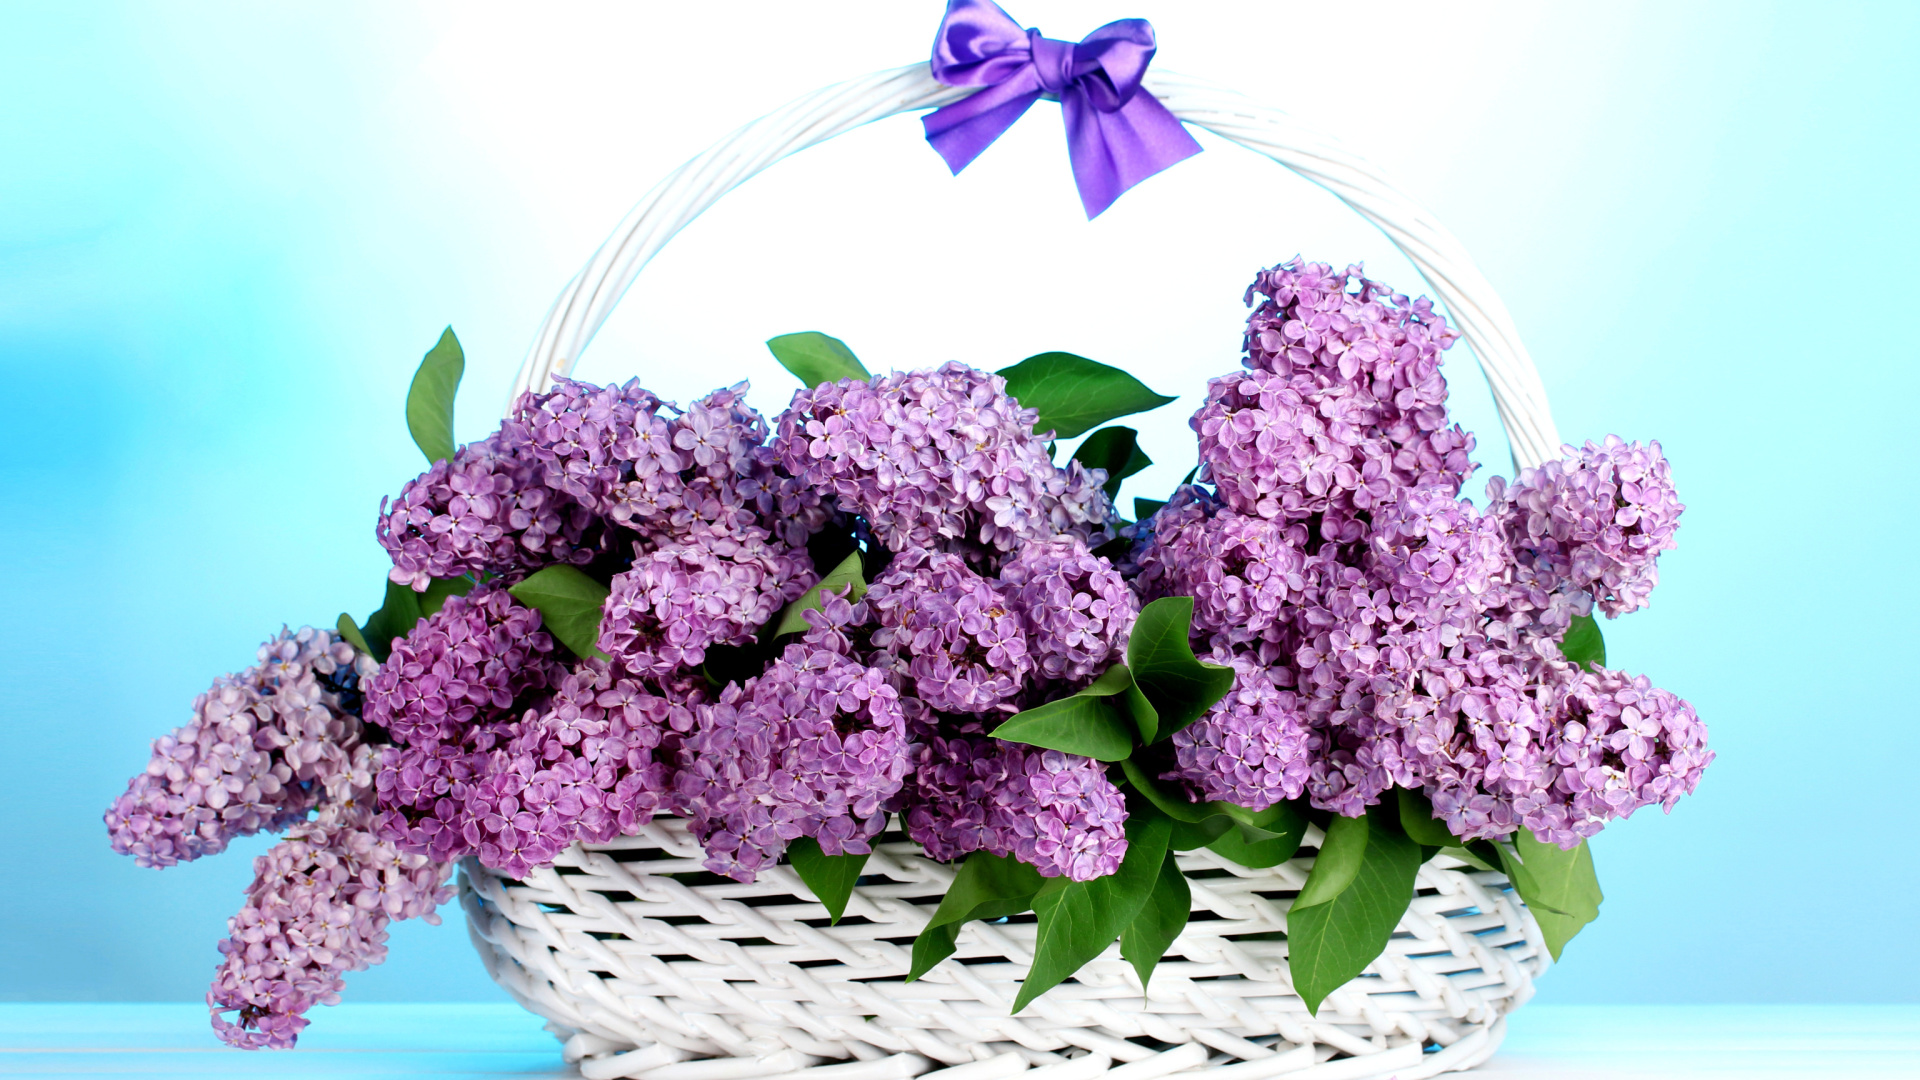 Baskets with lilac flowers screenshot #1 1920x1080